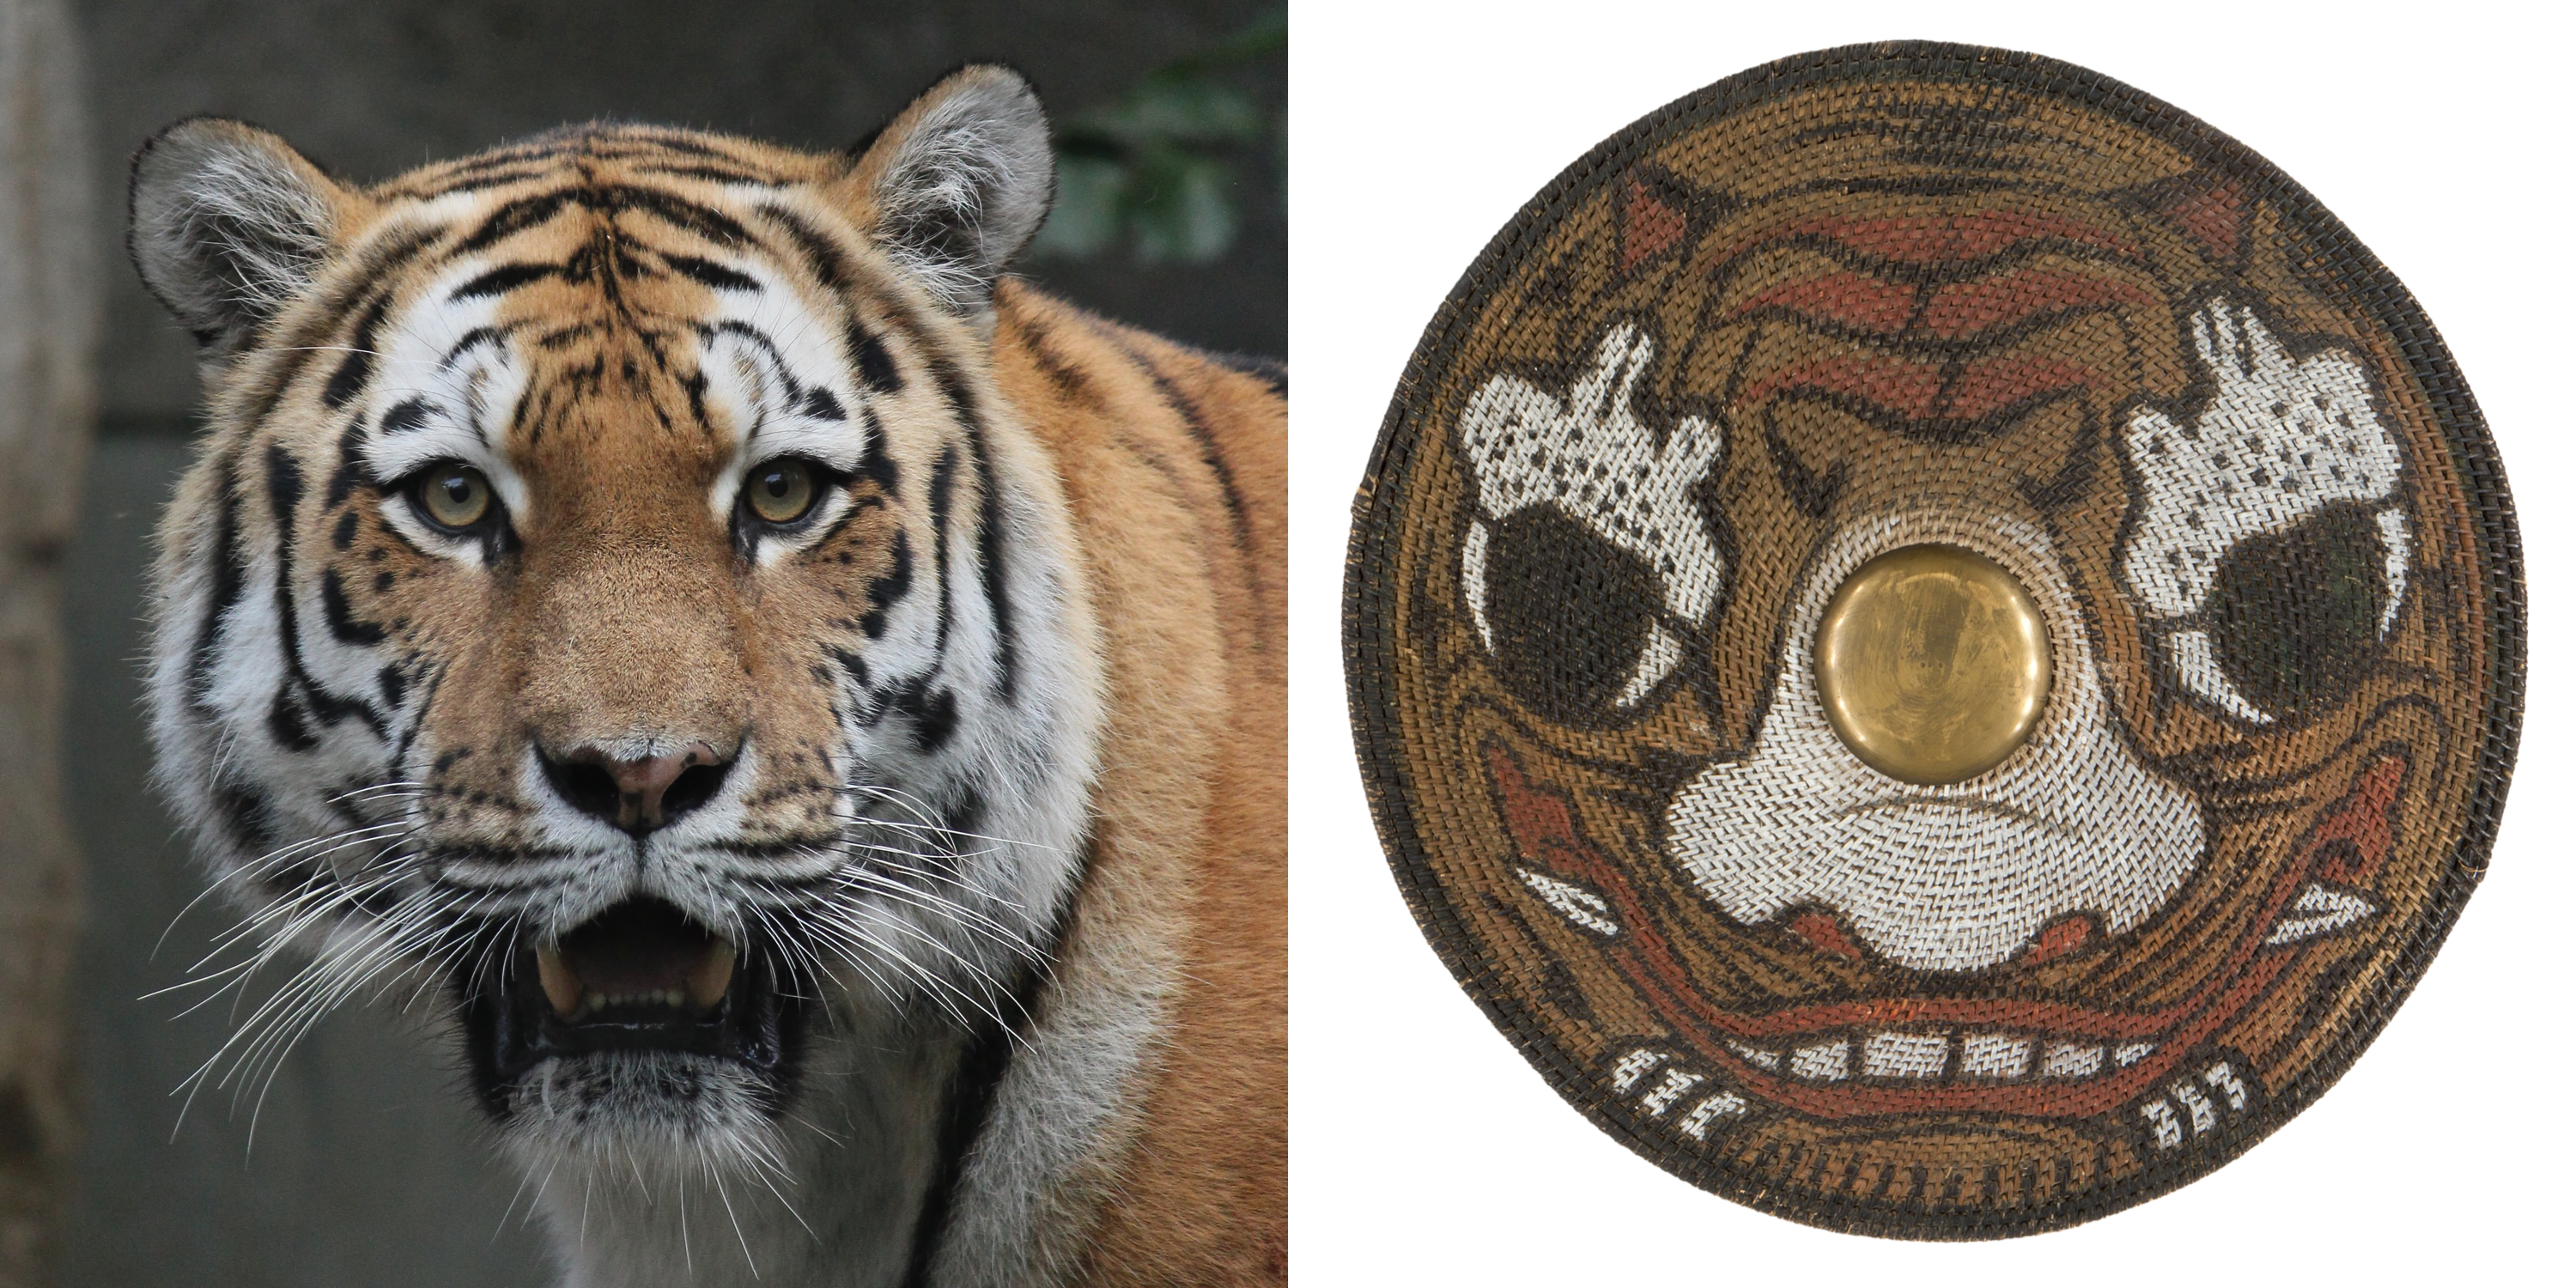 Rattan shield together with tiger